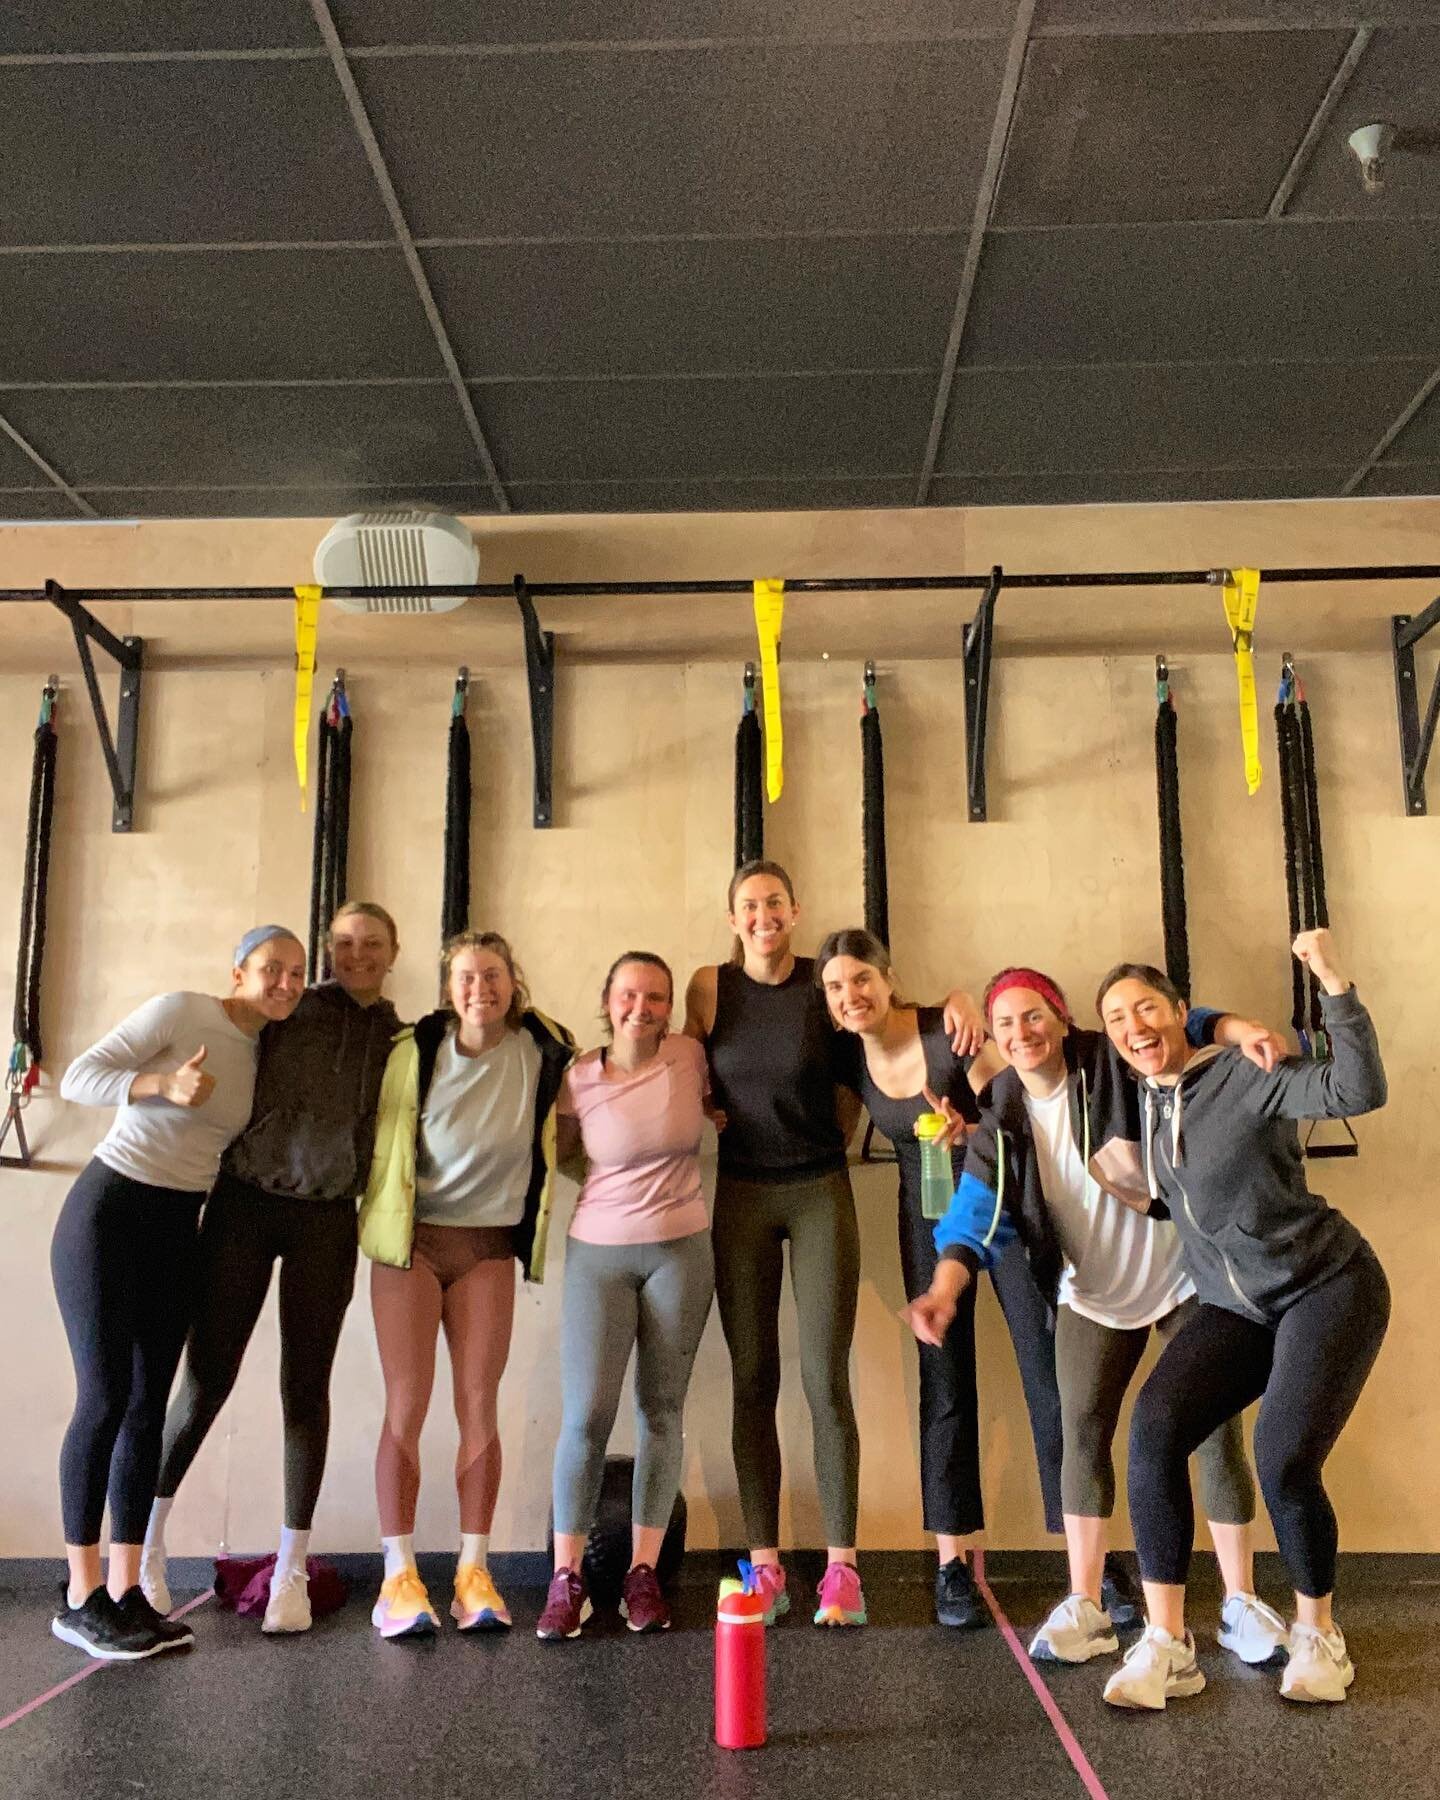 Big thank you to these ladies for coming out and getting their sweat on at my fundraising class, and to EVERYONE who has donated so far! 
I appreciate the support, and am happy to be helping such a great organization @realoptionsforcitykids 

If you 